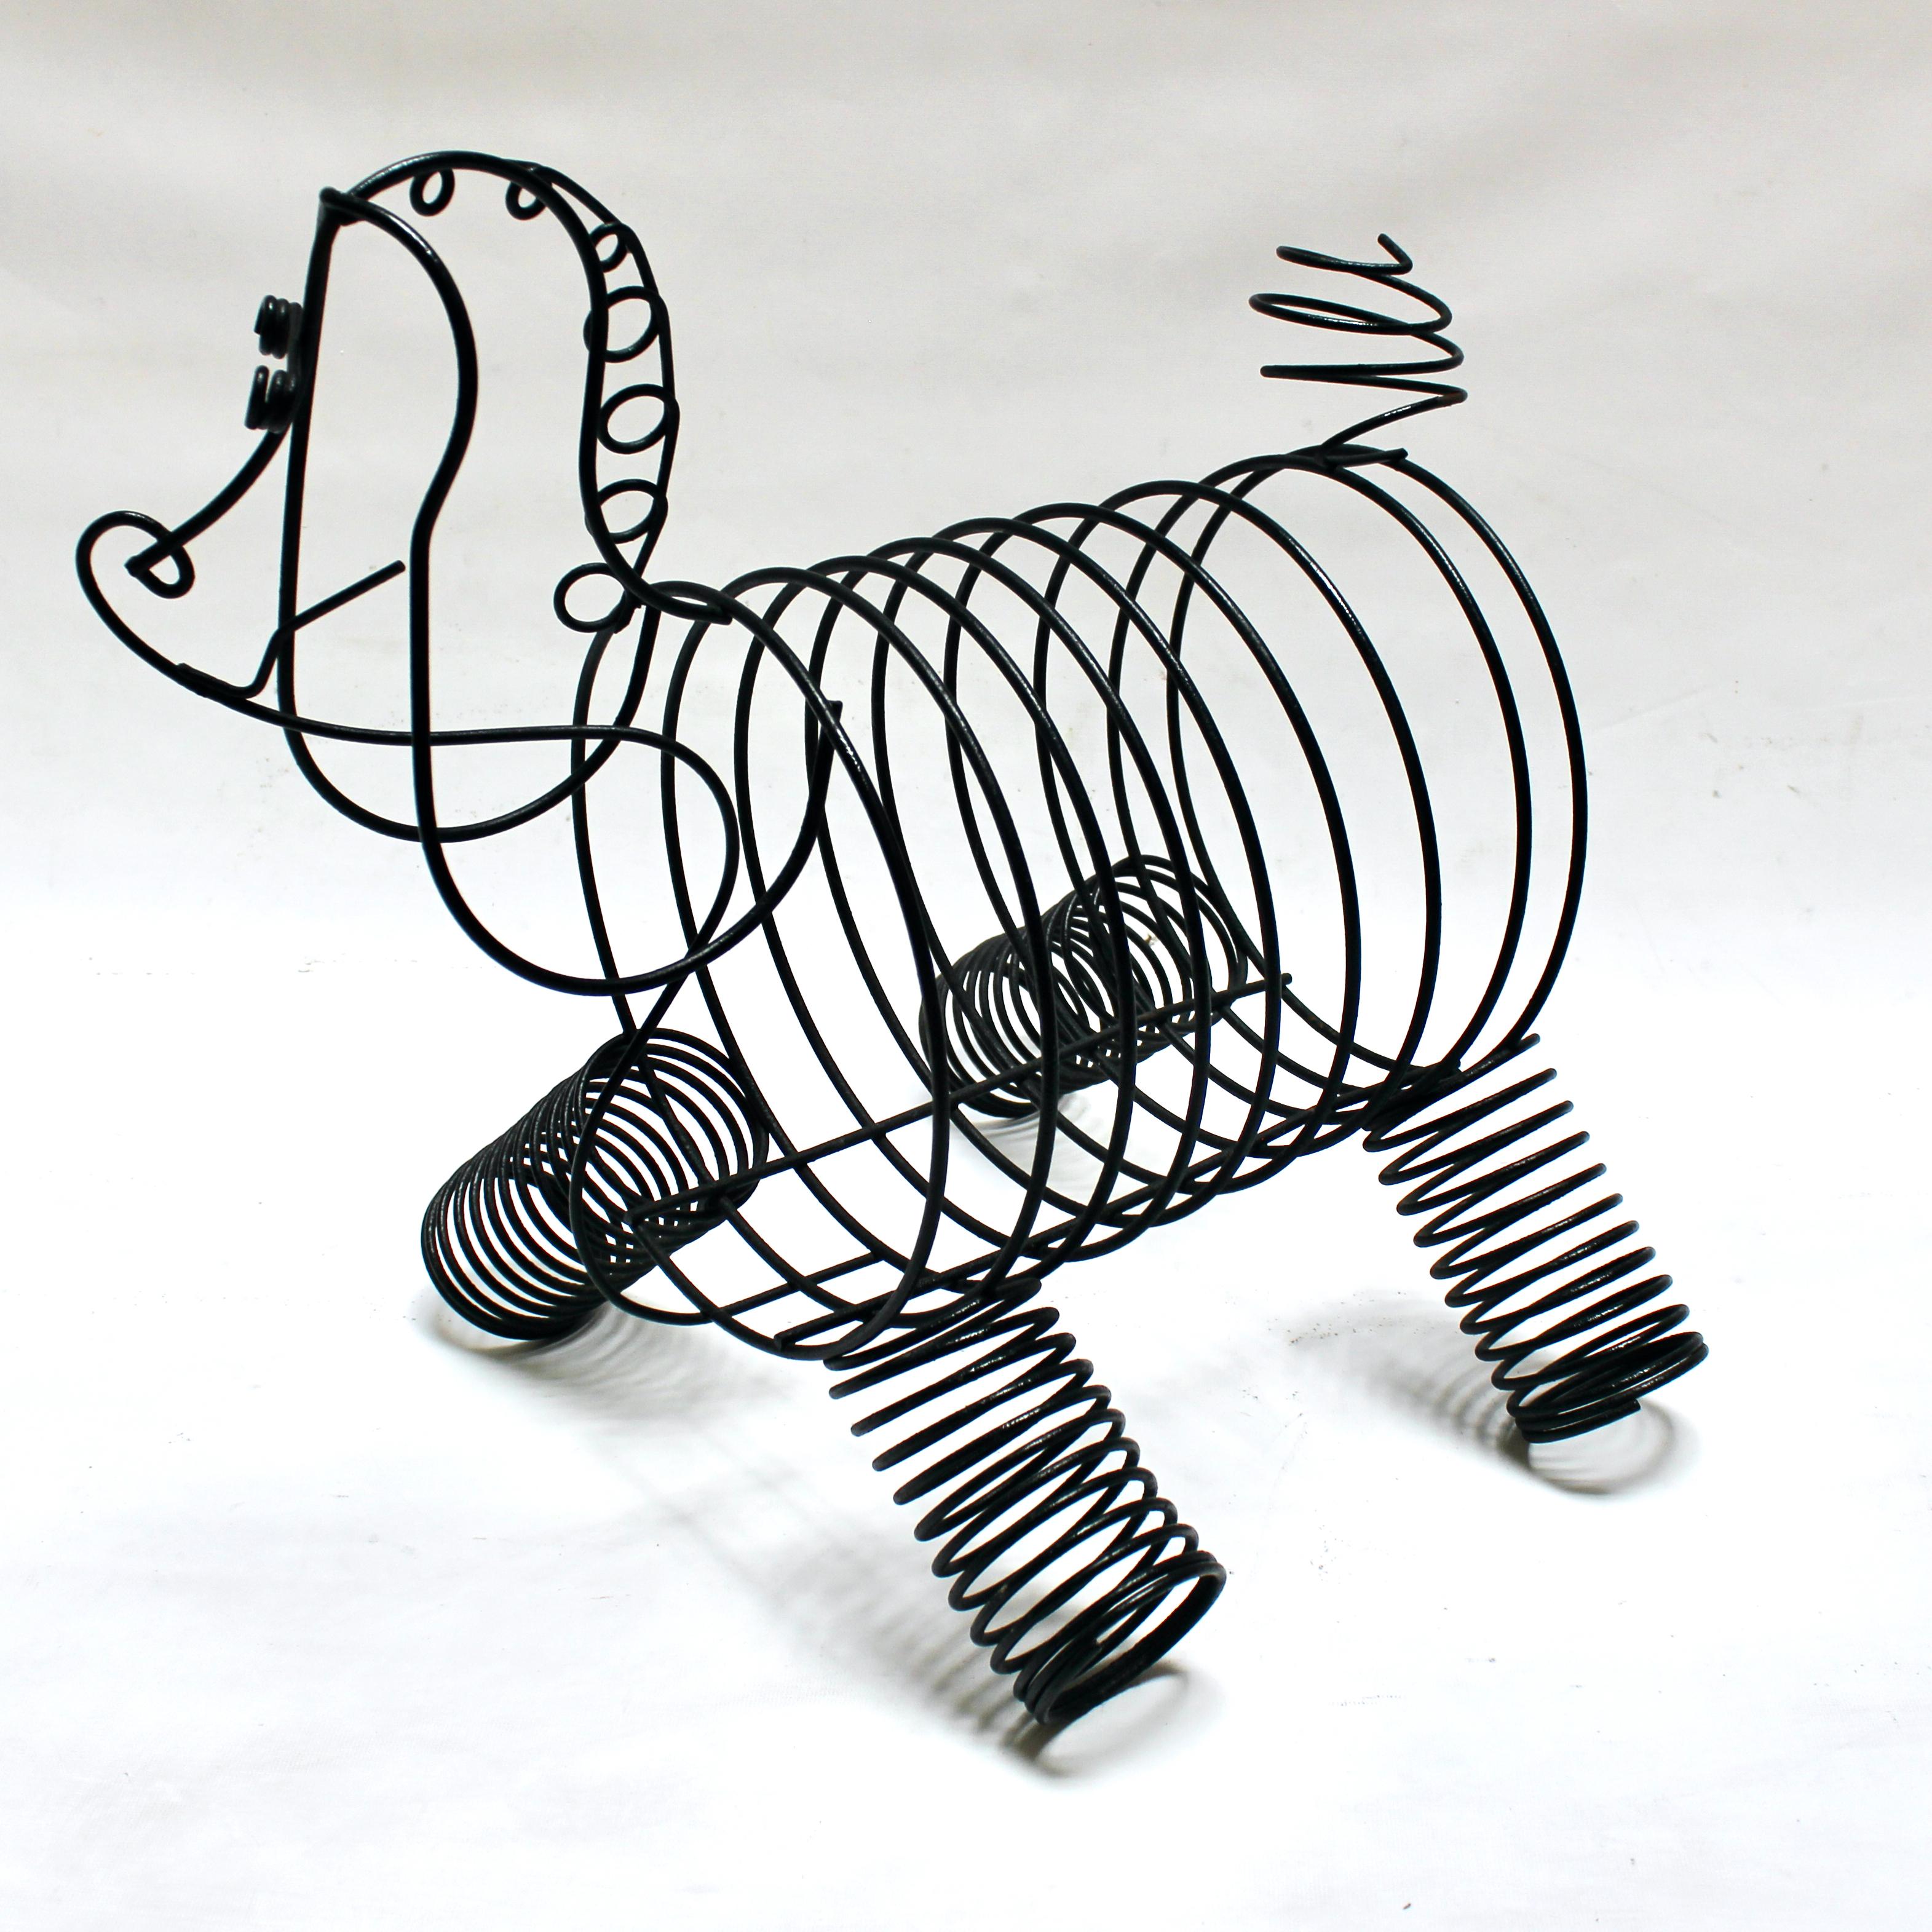 Vintage sculptural black metal poodle magazine holder or record rack by Frederic Weinberg. A delightful and whimsical sculpture that also functions as a storage piece. In excellent condition.

Measures: Width: 15 in / depth: 20 in / height: 19.25